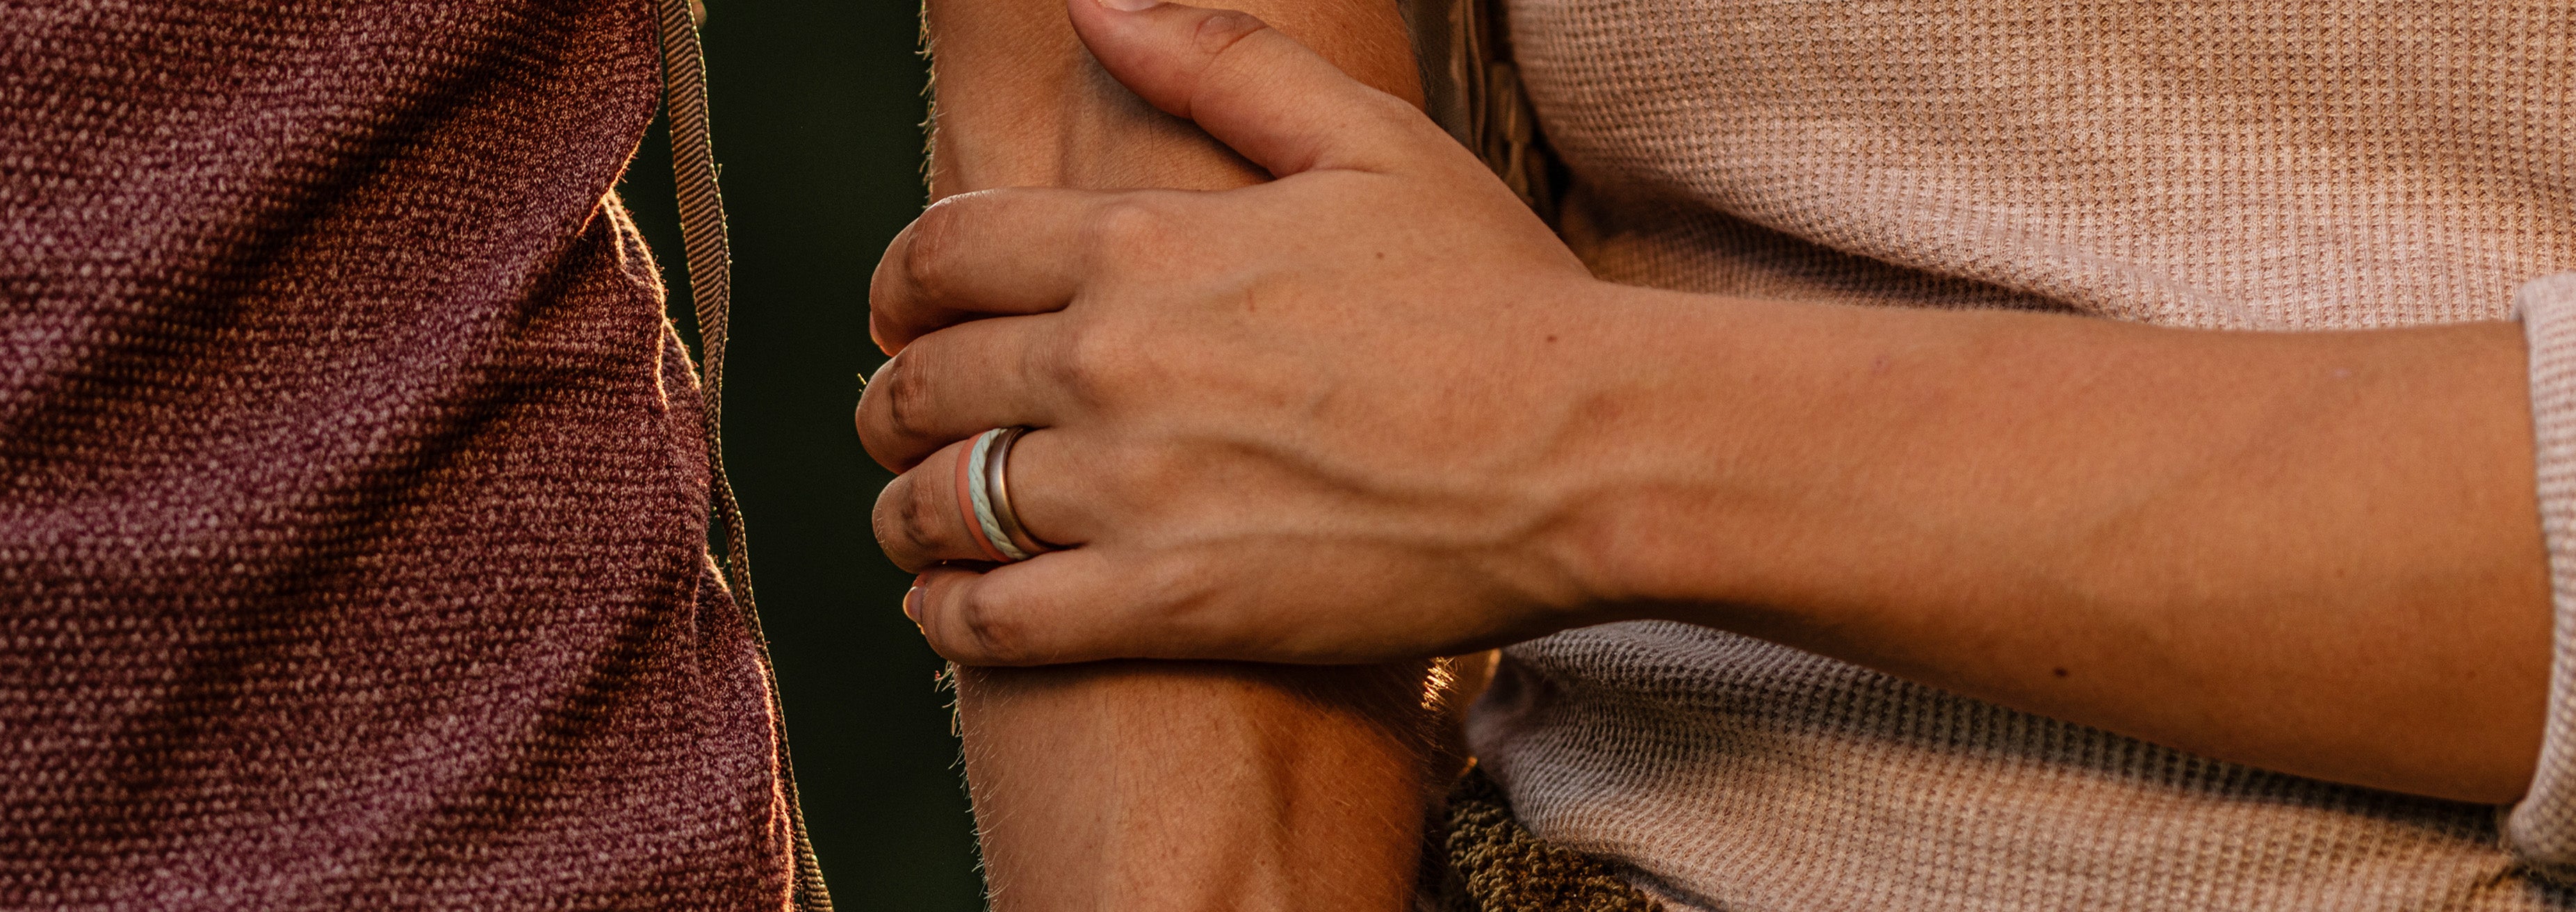 Northern Pine - Stackable Ring lifestyle image 3